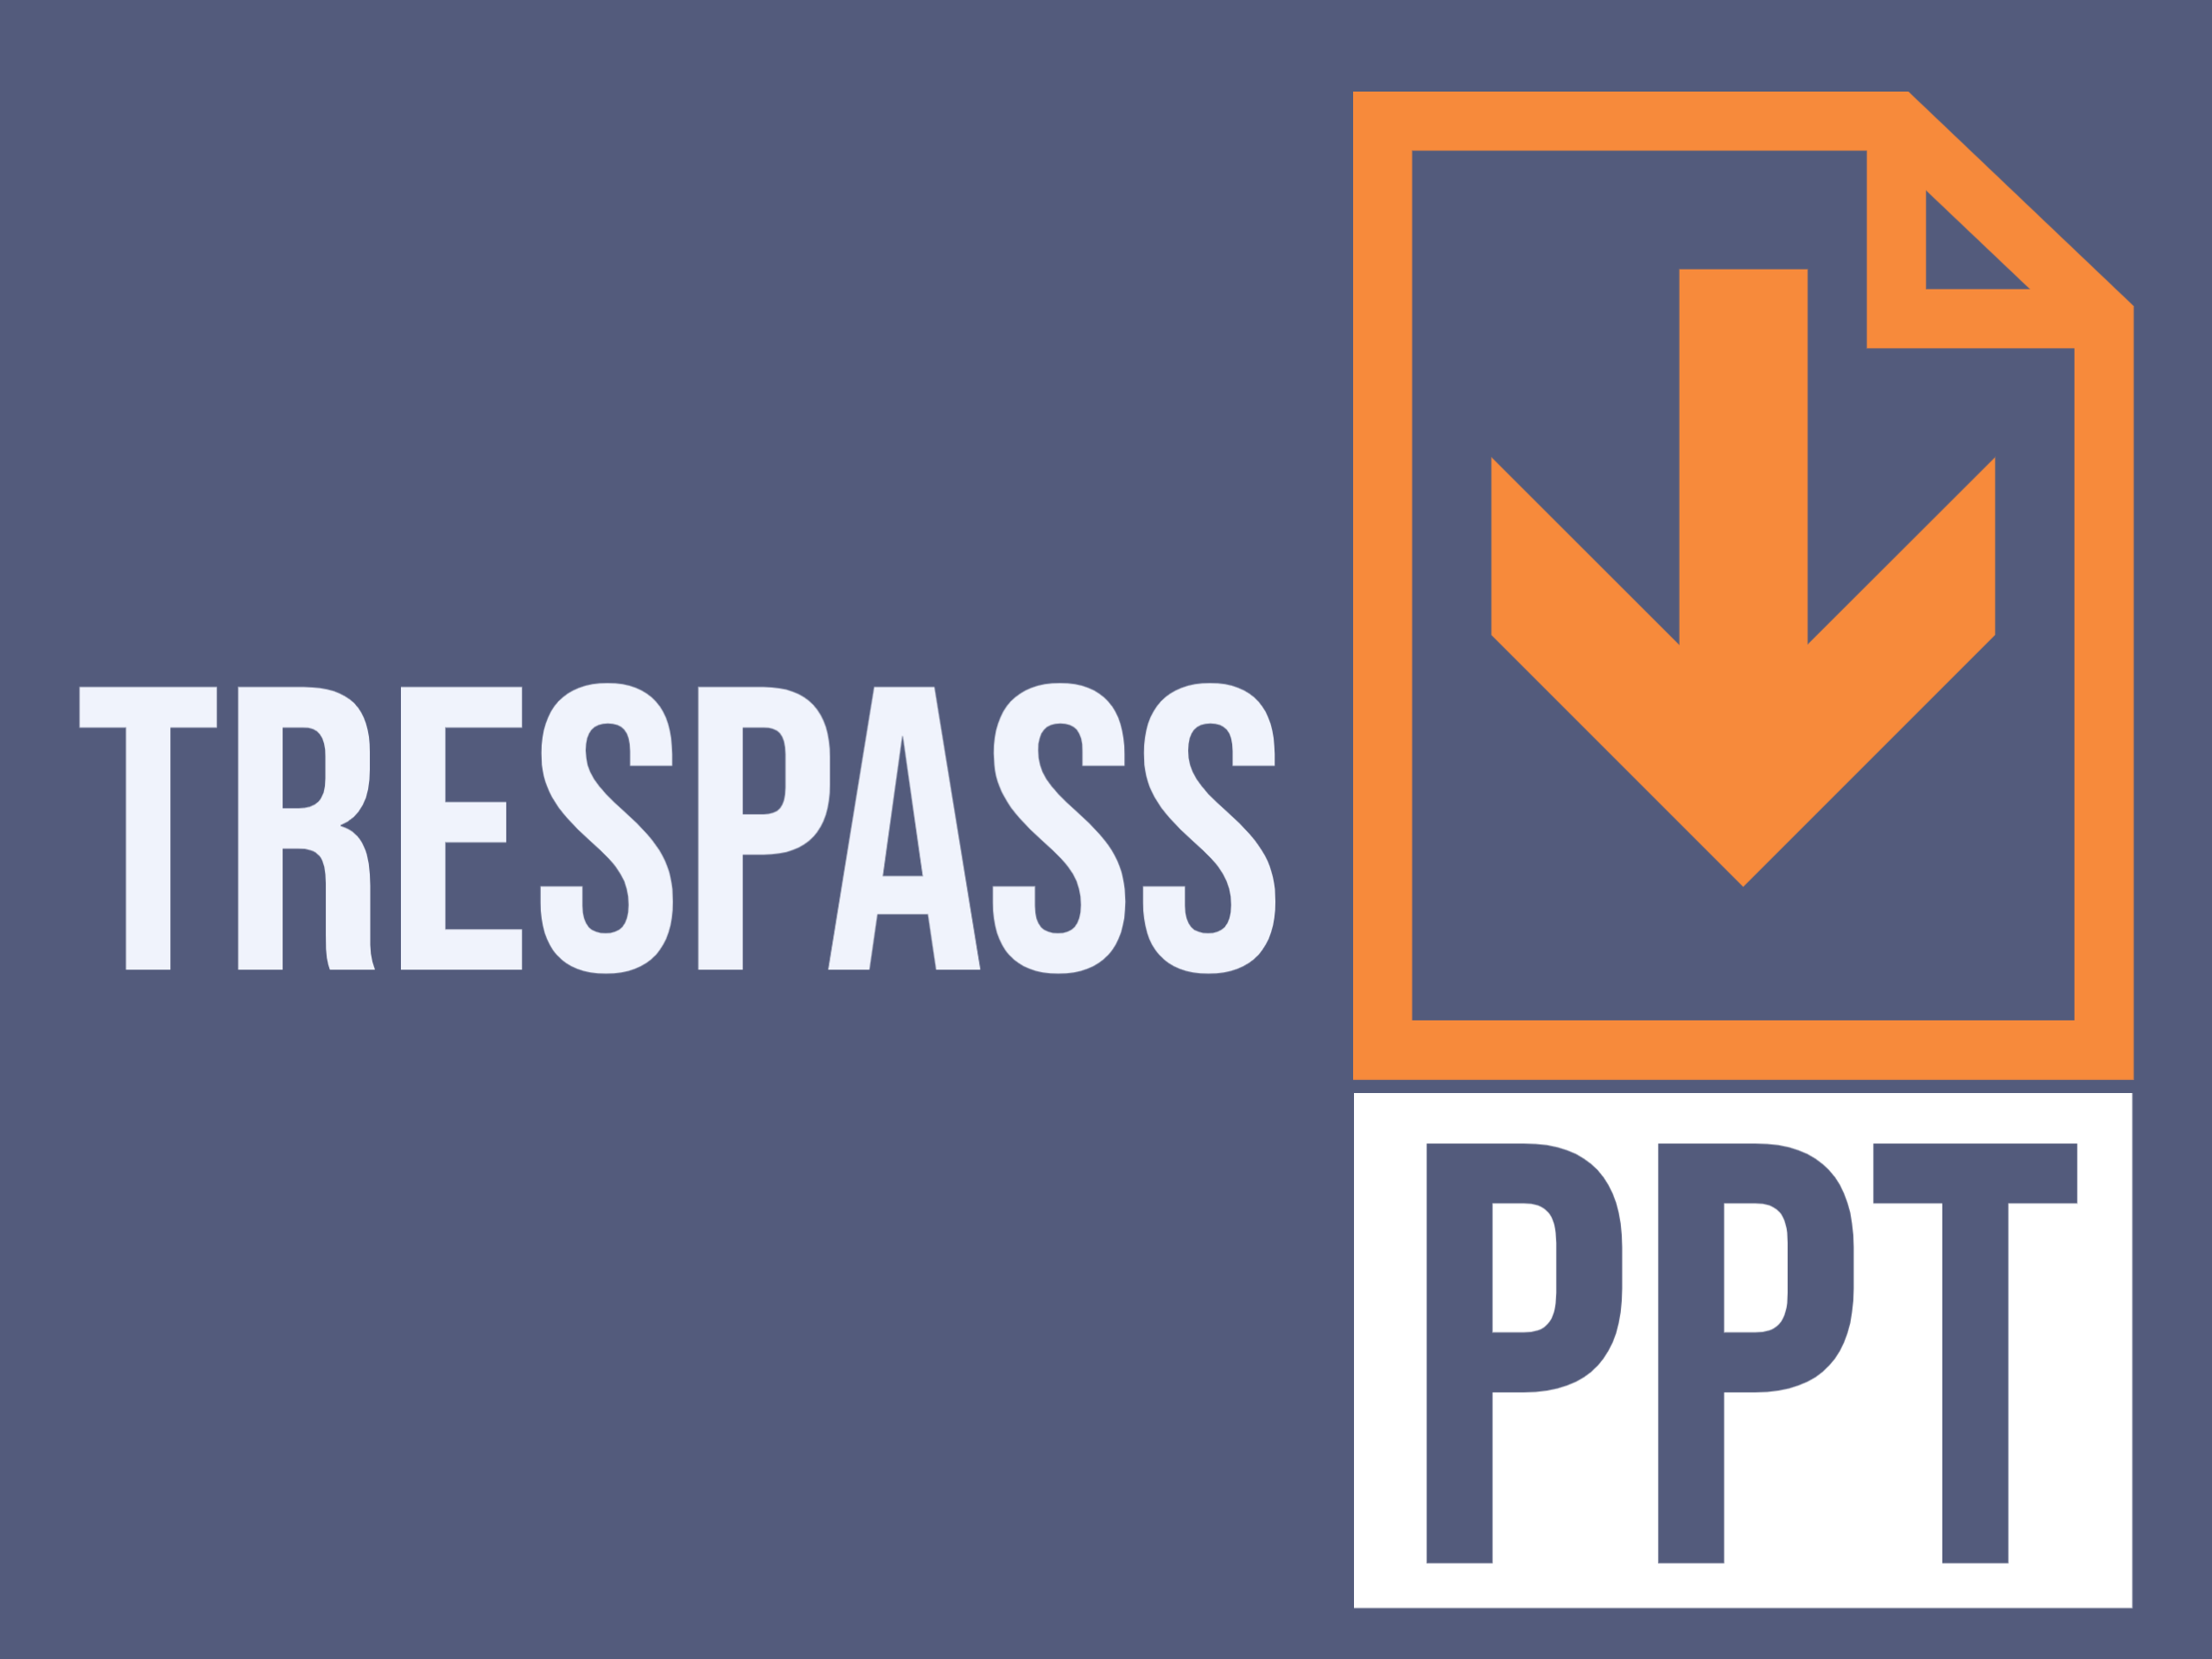 Trespass template, SOP or assignment instruction for ejecting people from site.   Ensure you're compliant with local laws and regulations when removing unauthorised people from site. Make sure you have a security AI trespass to hand.